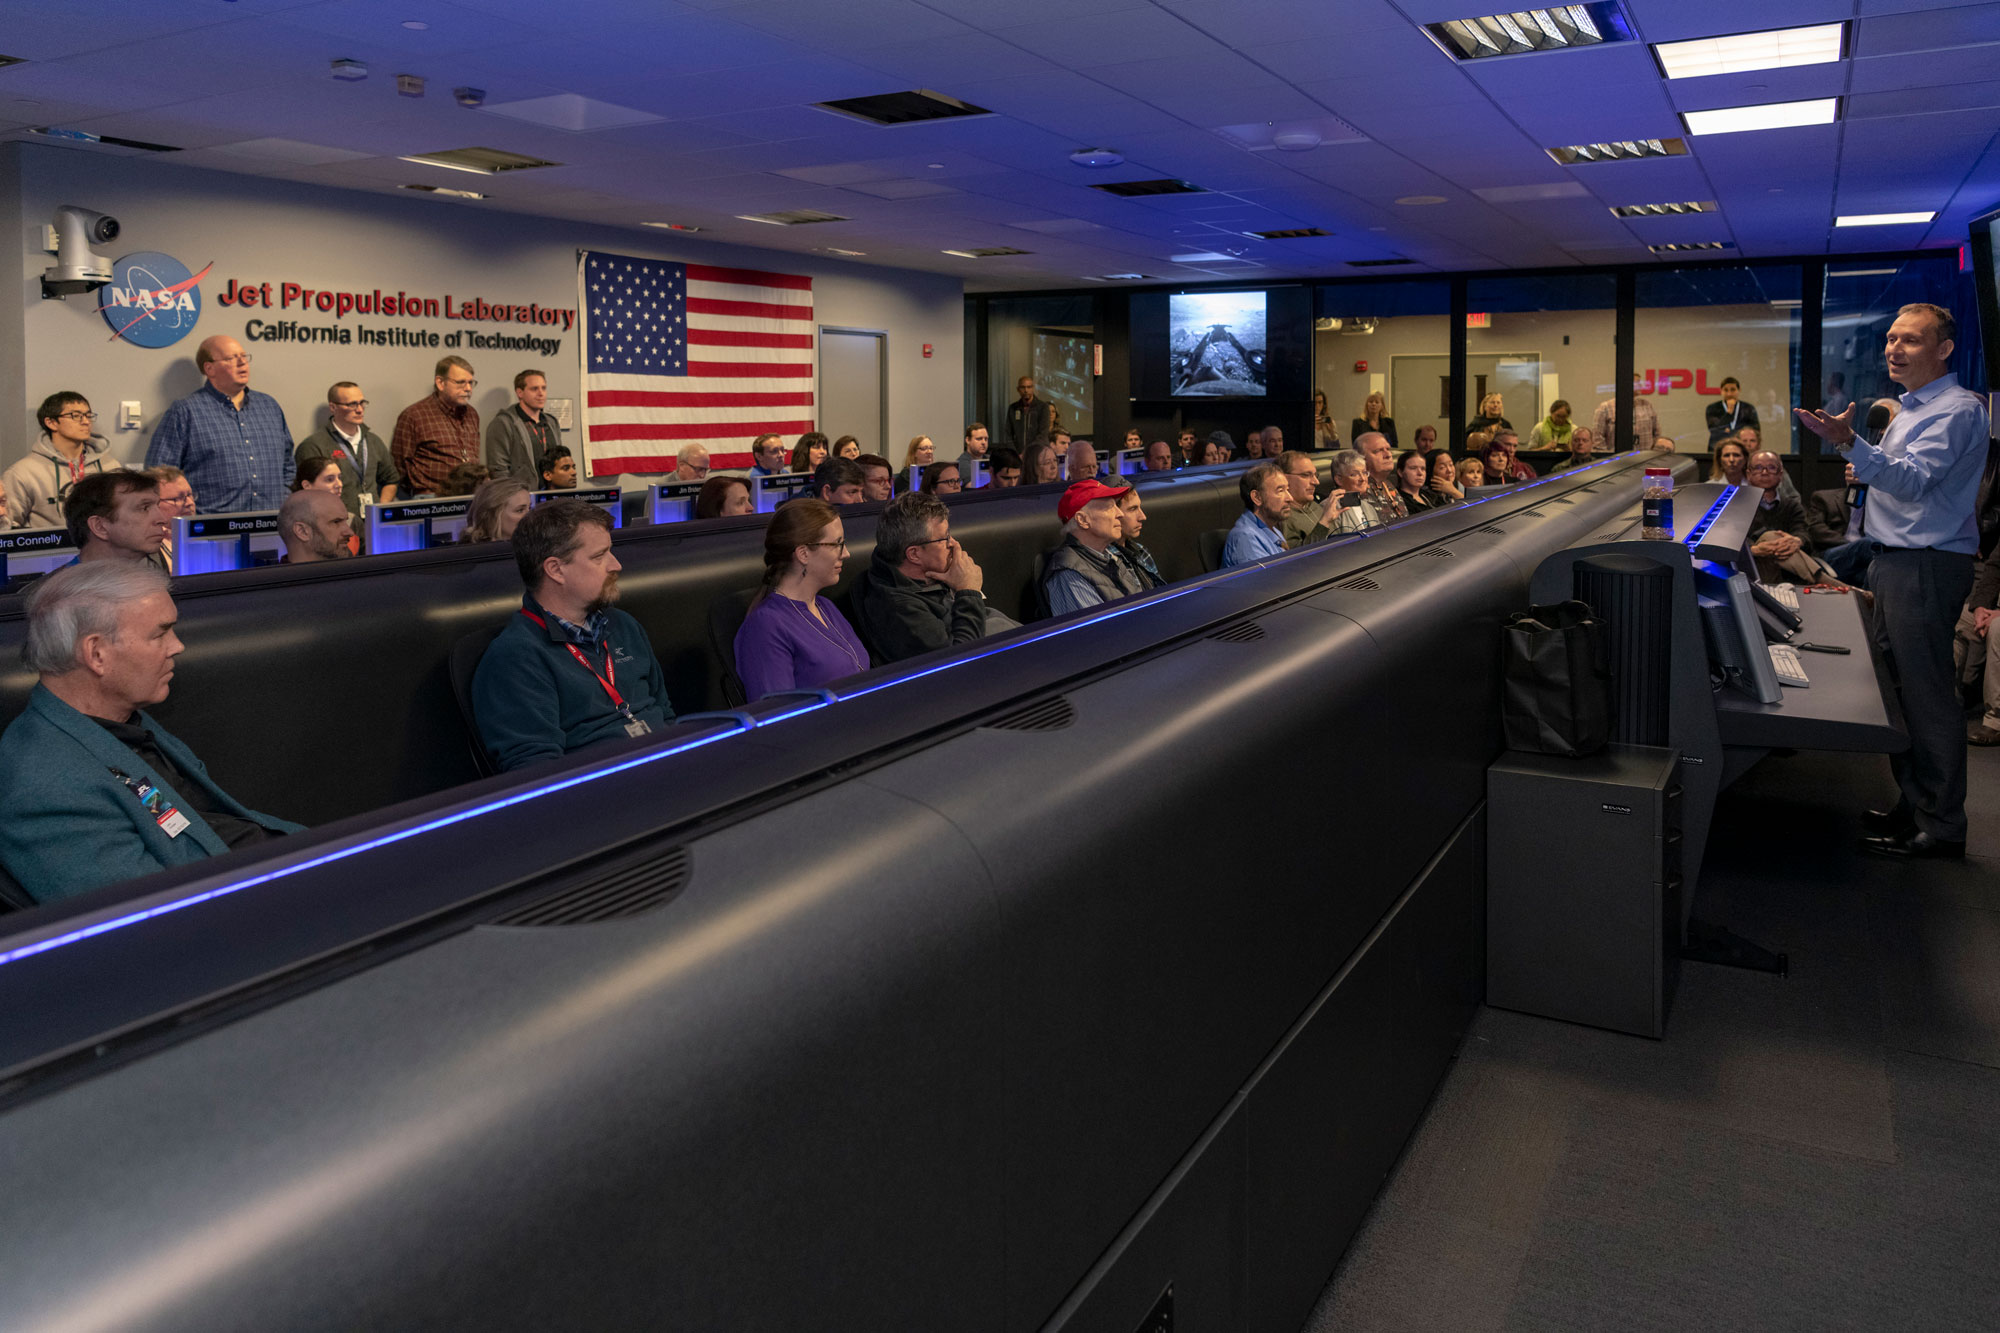 NASA Associate Administrator for Science Thomas Zurbuchen addressed the Opportunity rover team inside Mission Control at NASA’s Jet Propulsion Laboratory in Pasadena, California, a few hours before the team made its last attempts to listen for the rover’s signal from Mars. The image was taken on Feb. 12, 2019.